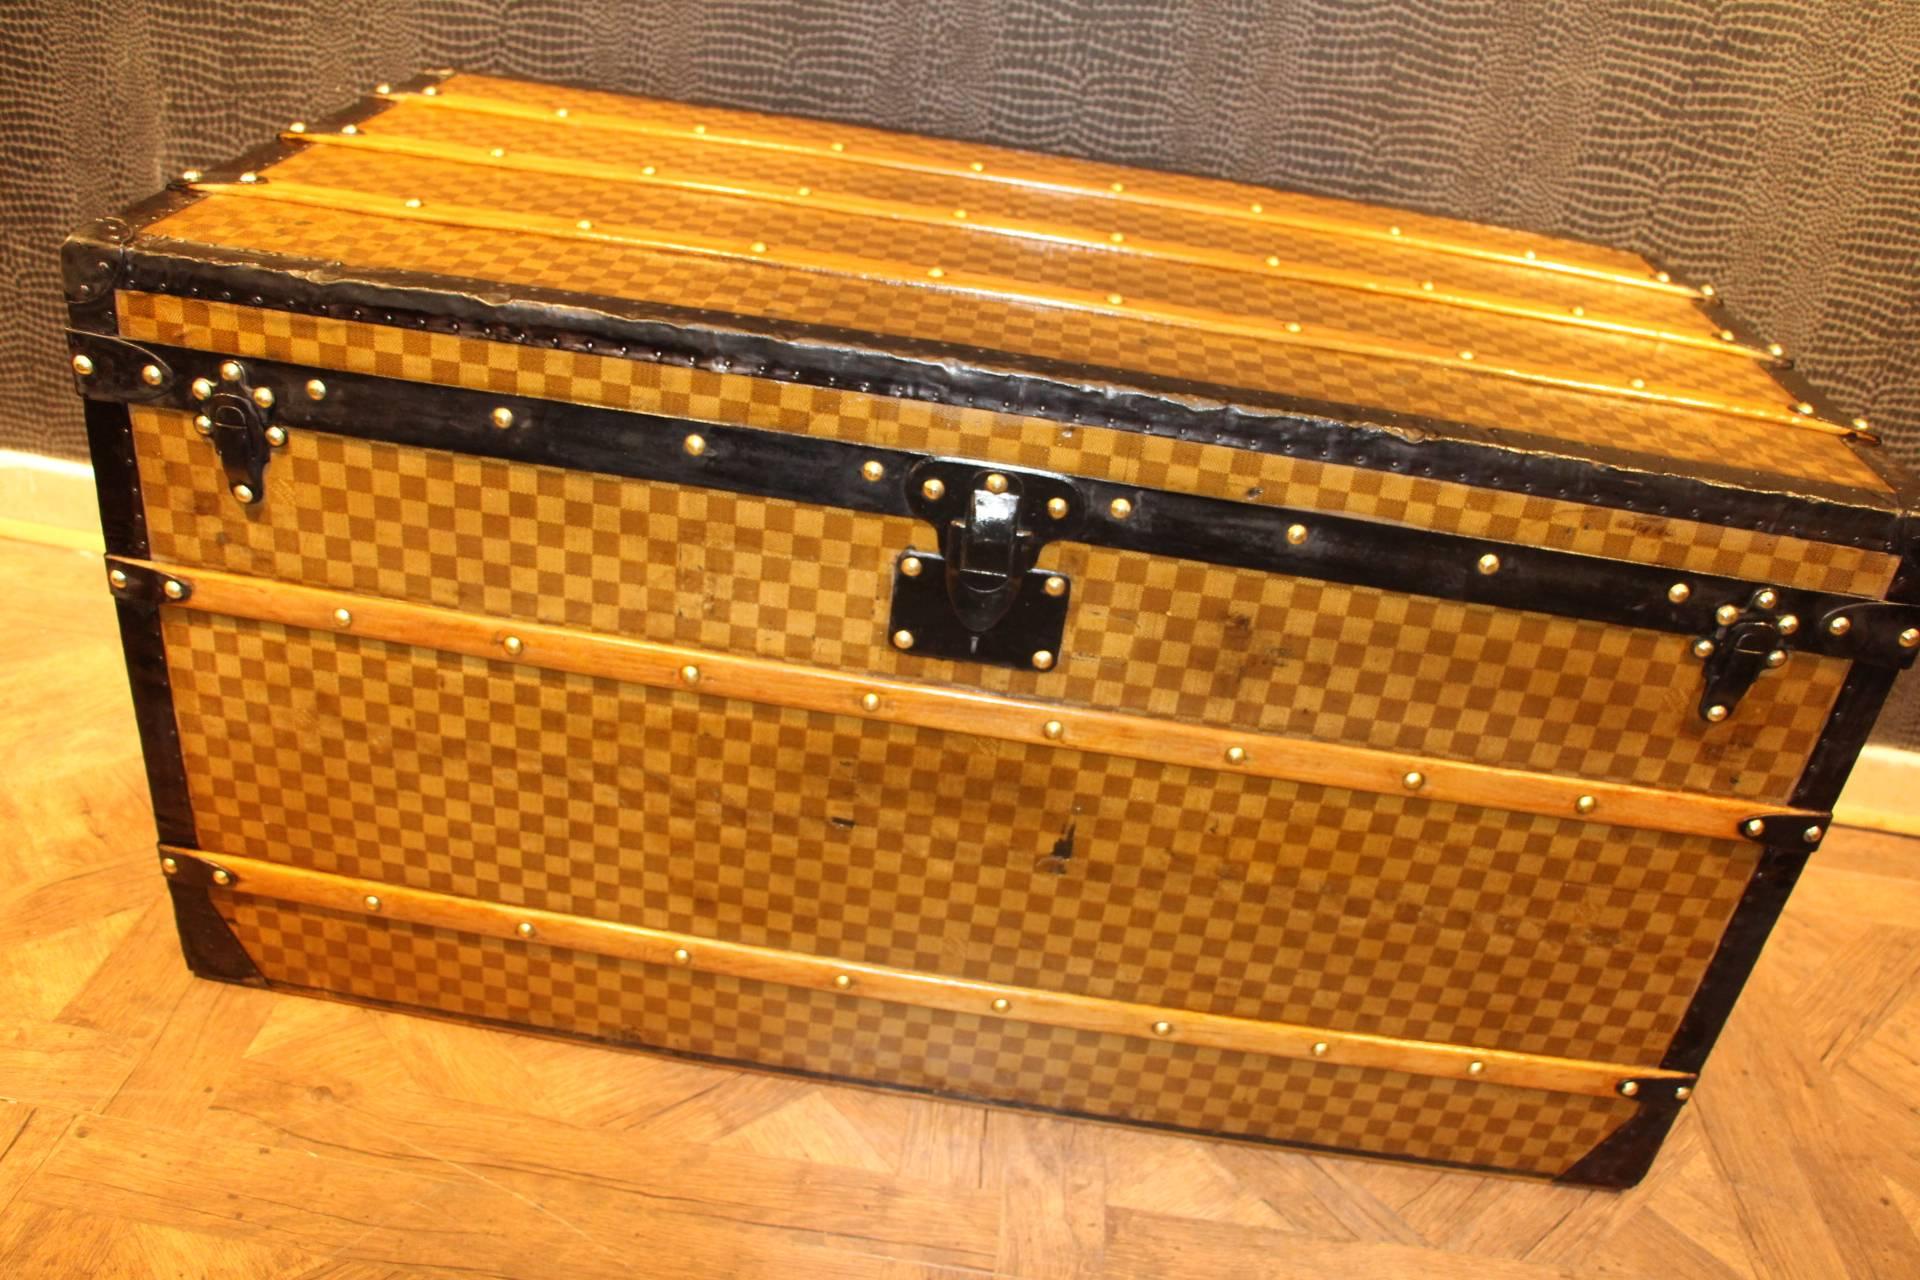 This beautiful steamer trunk has got the rare and famous 